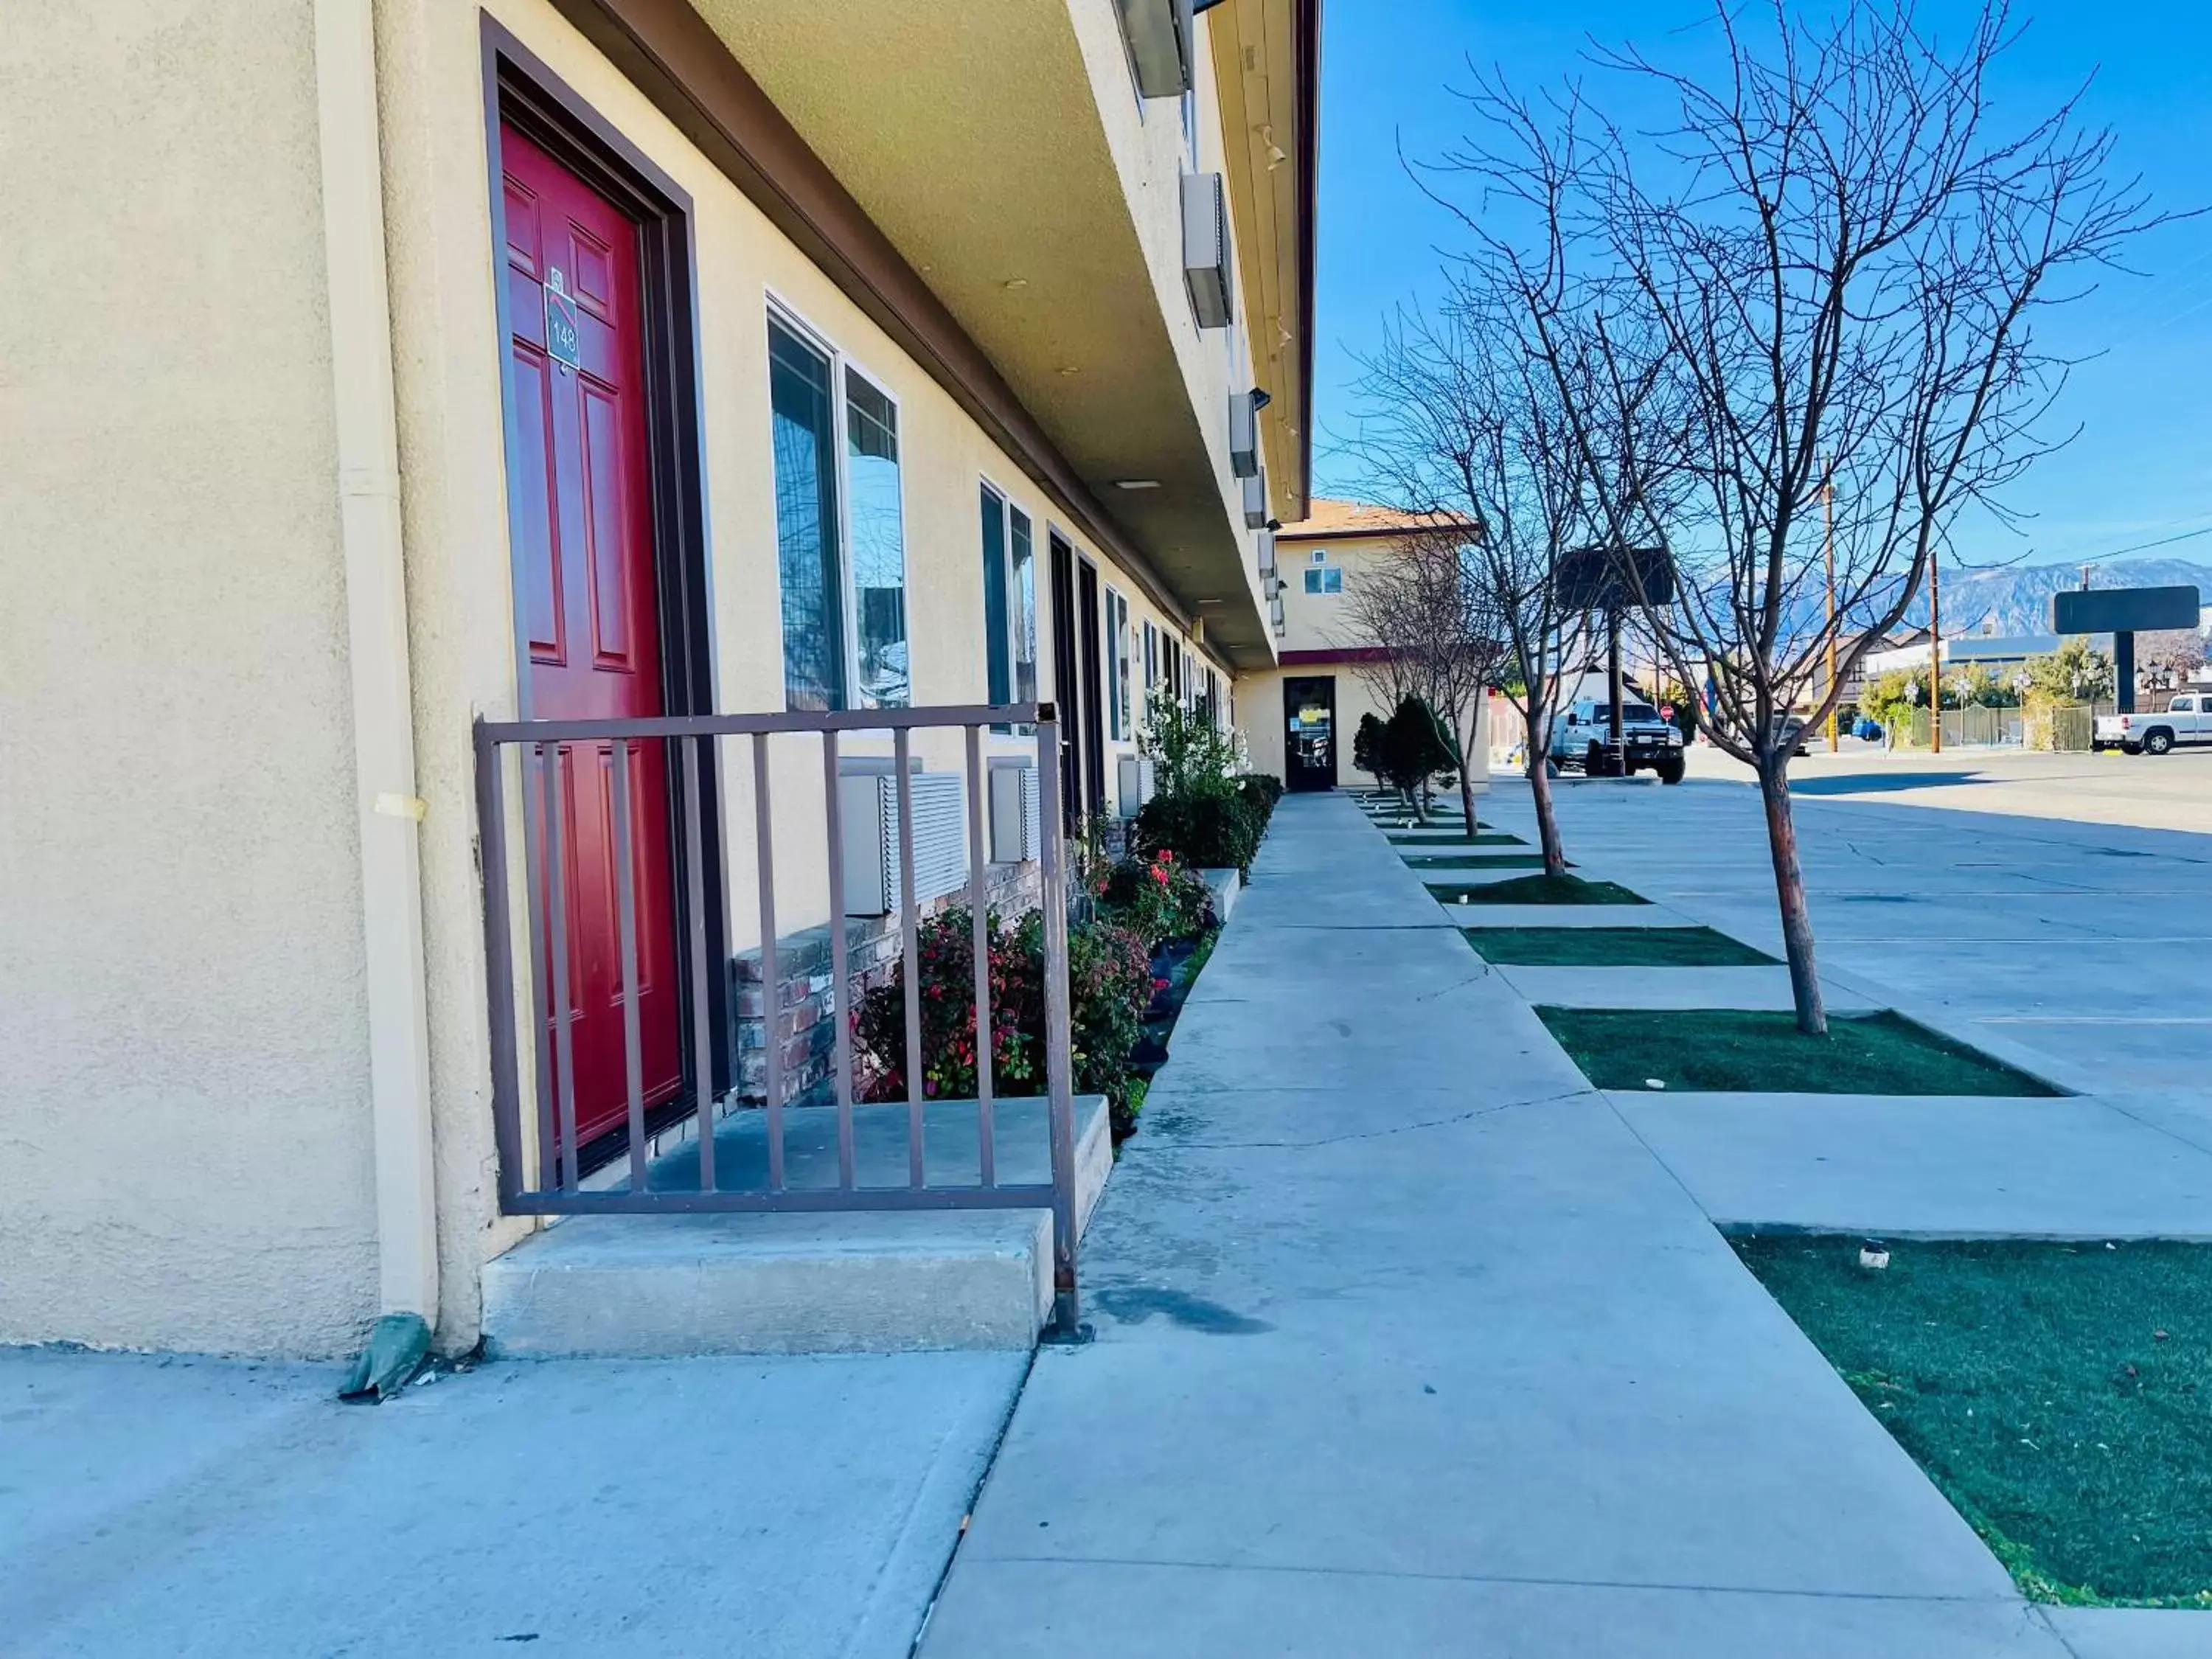 Property building in Quality Inn Bishop near Mammoth